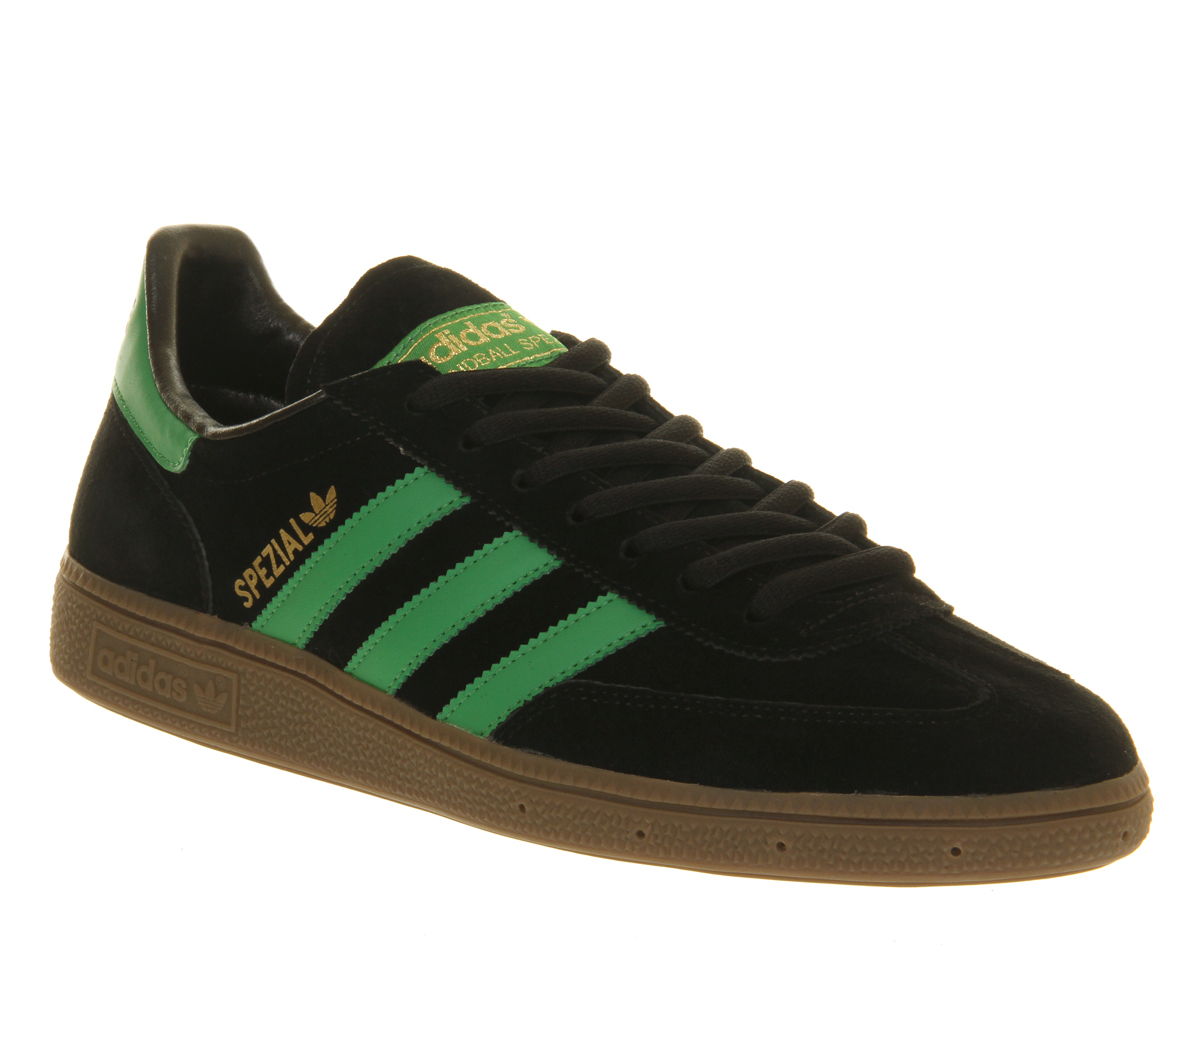 adidas spezial black and green,OFF 71%,www.concordehotels.com.tr